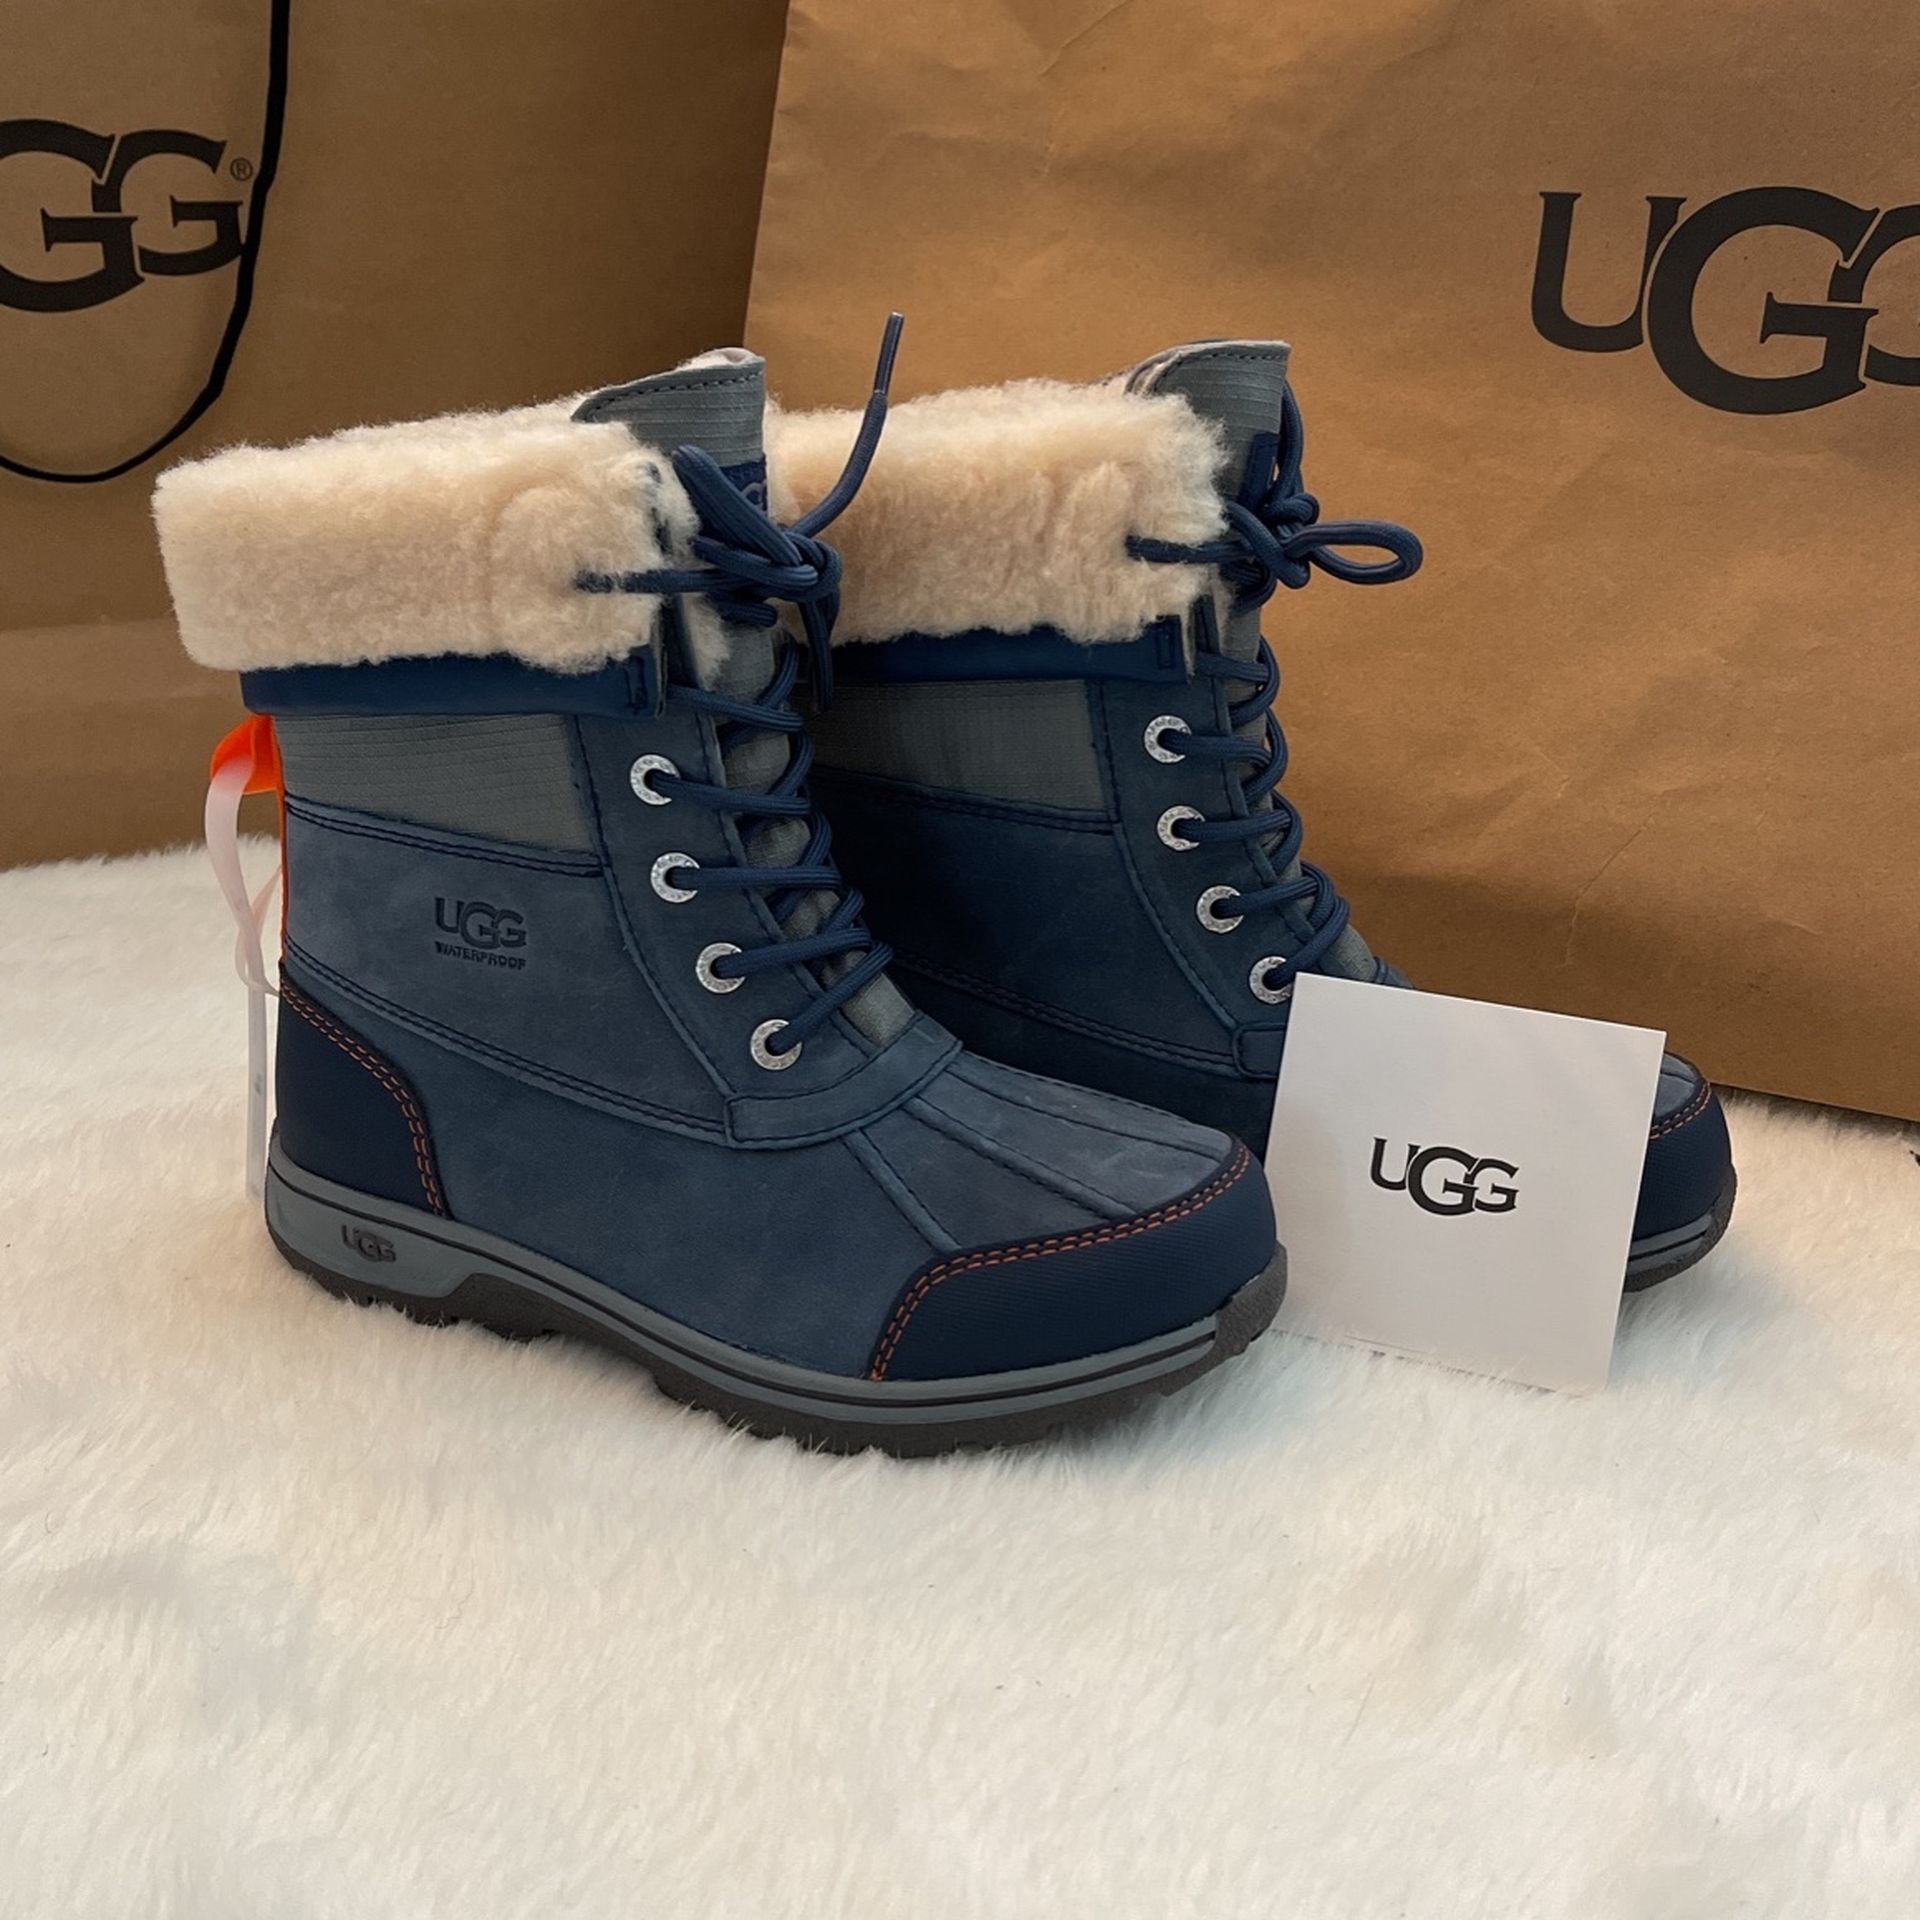 UGG BOY SNOW BOOTS SIZE 3 NEW